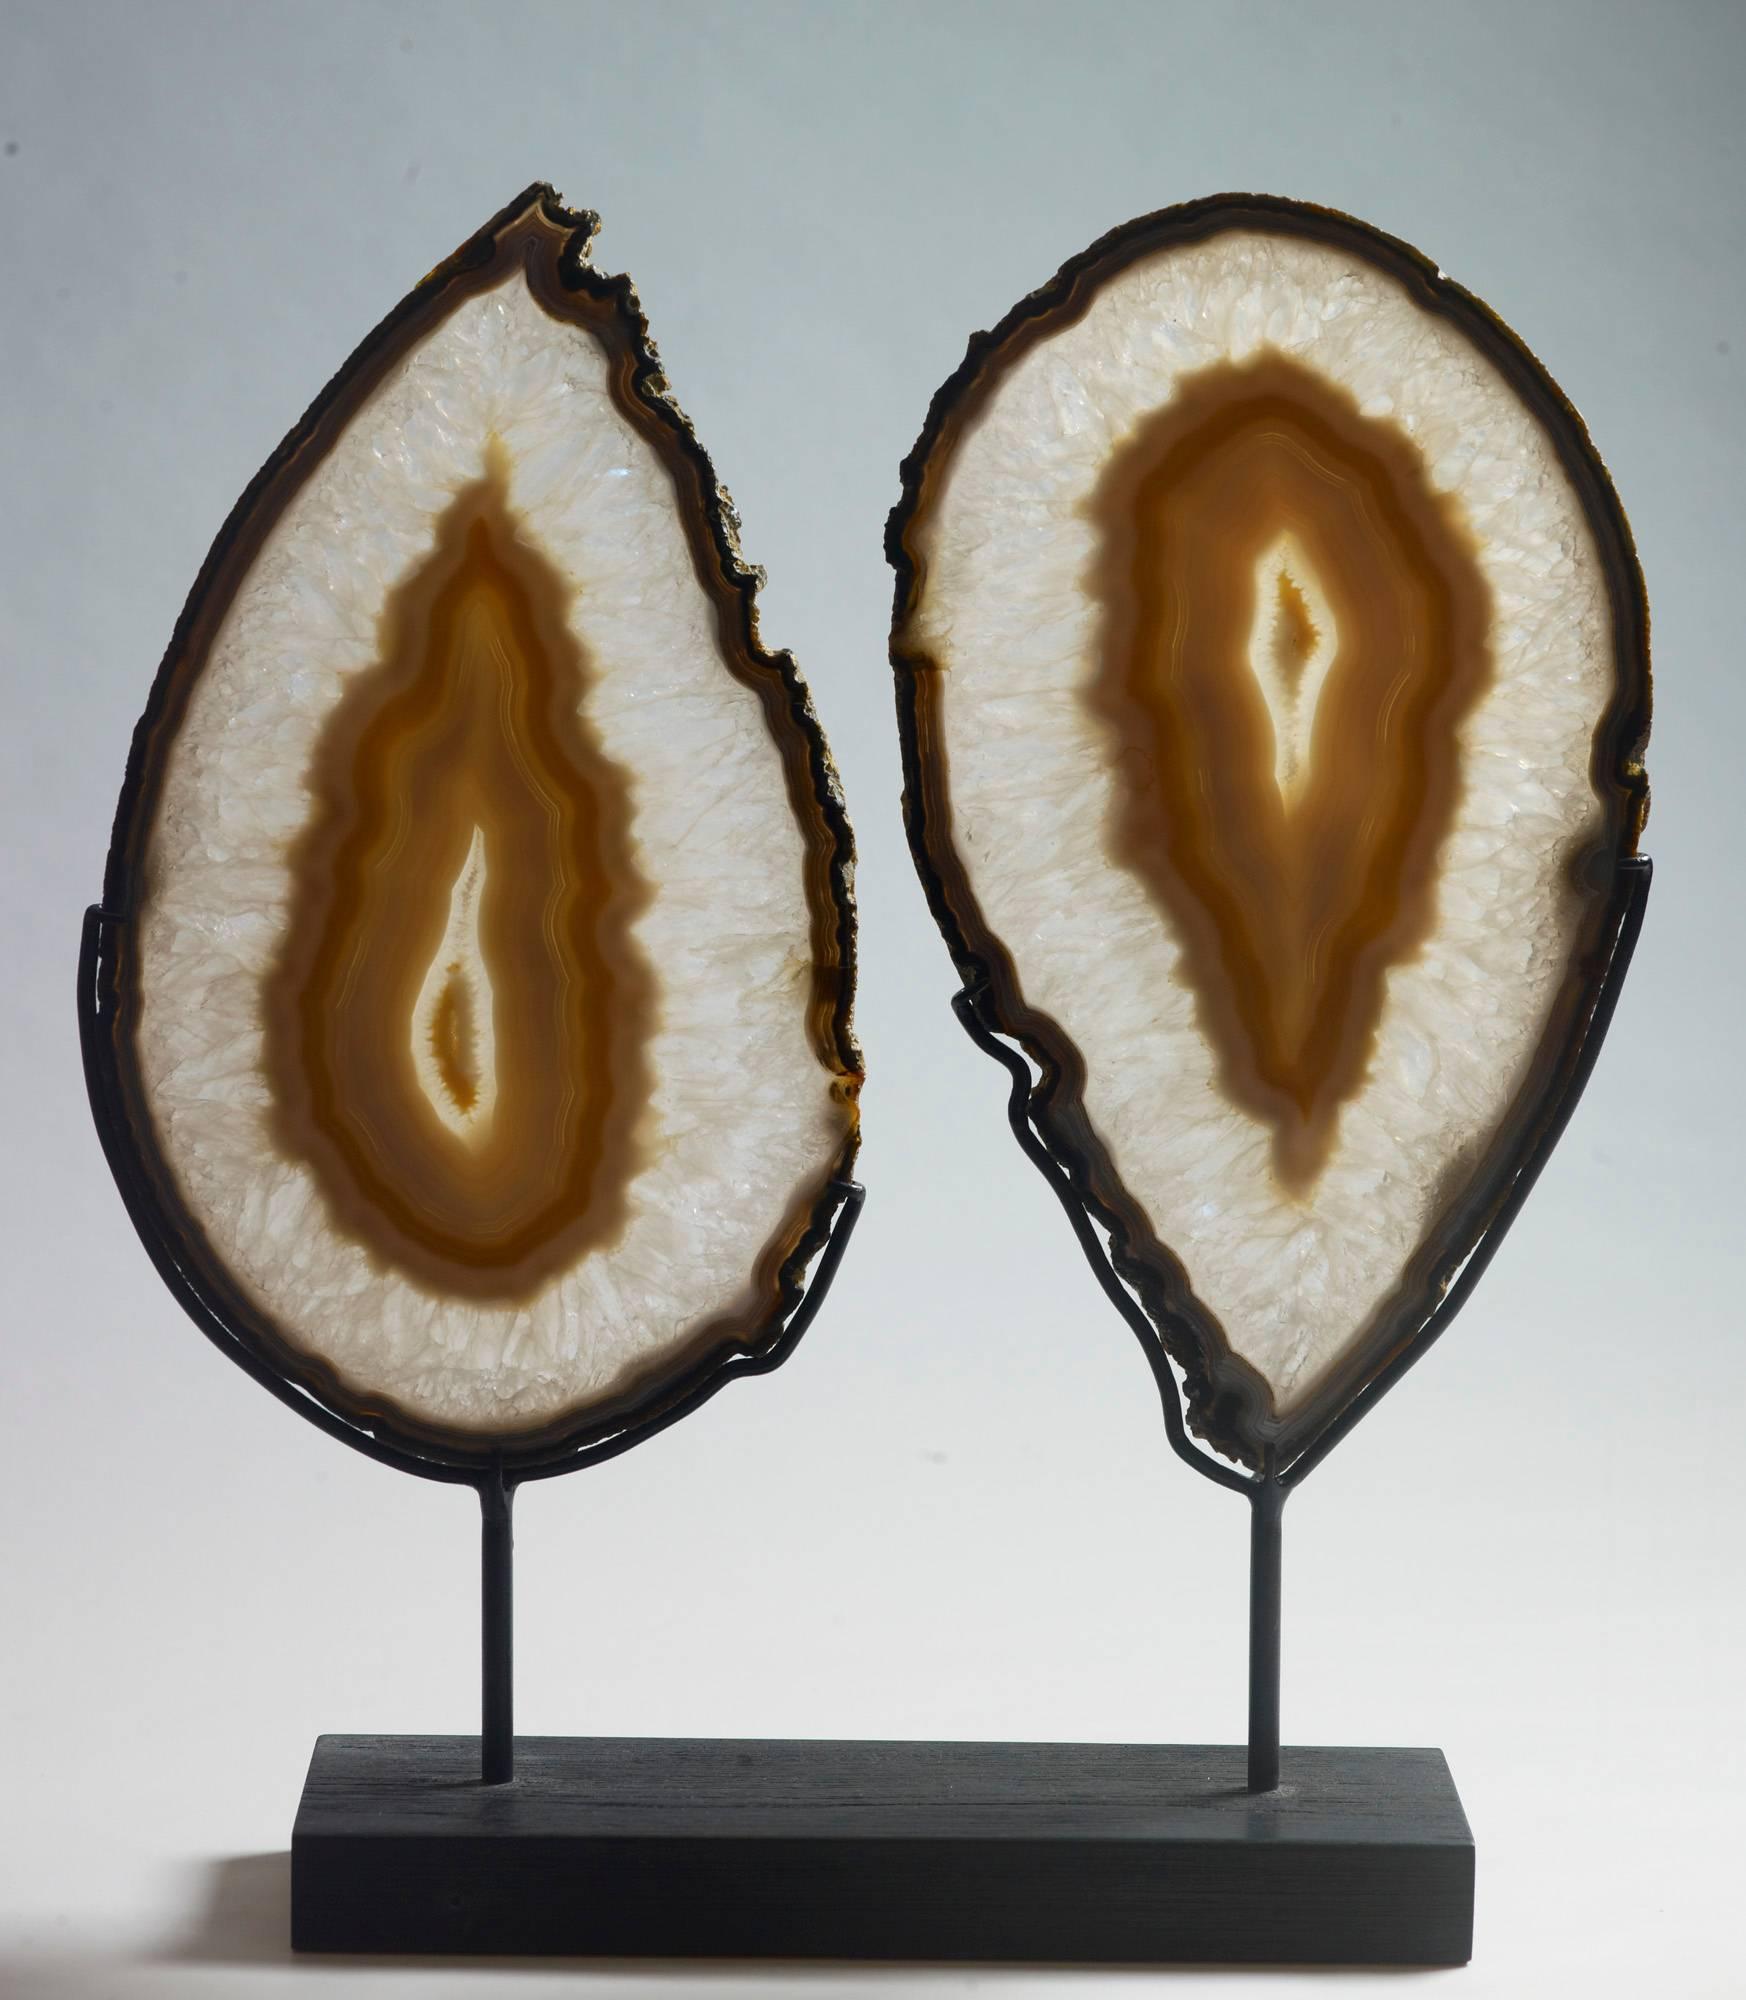 “Yin Yang” pair of polished agate slices. Rio Grande do Sul, Brazil. Measures: Color differences in the images are the result of back lighting. 45 x 40 x 10 with stand. 